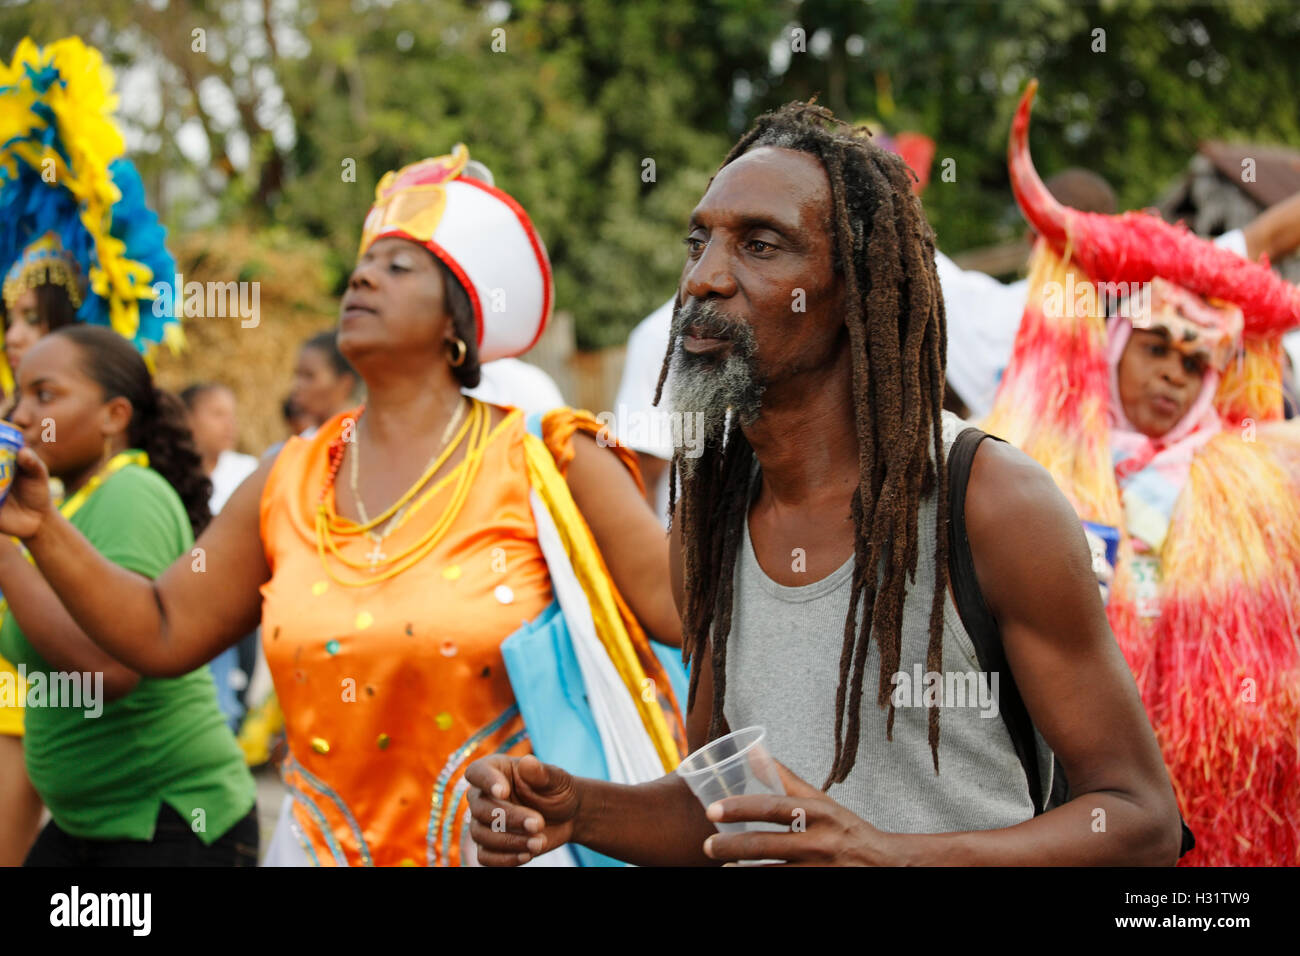 Carnival celebration in Roseau on the island of Dominica, Caribbean. Photo Copyright © Brandon Cole. All rights reserved worldwi Stock Photo